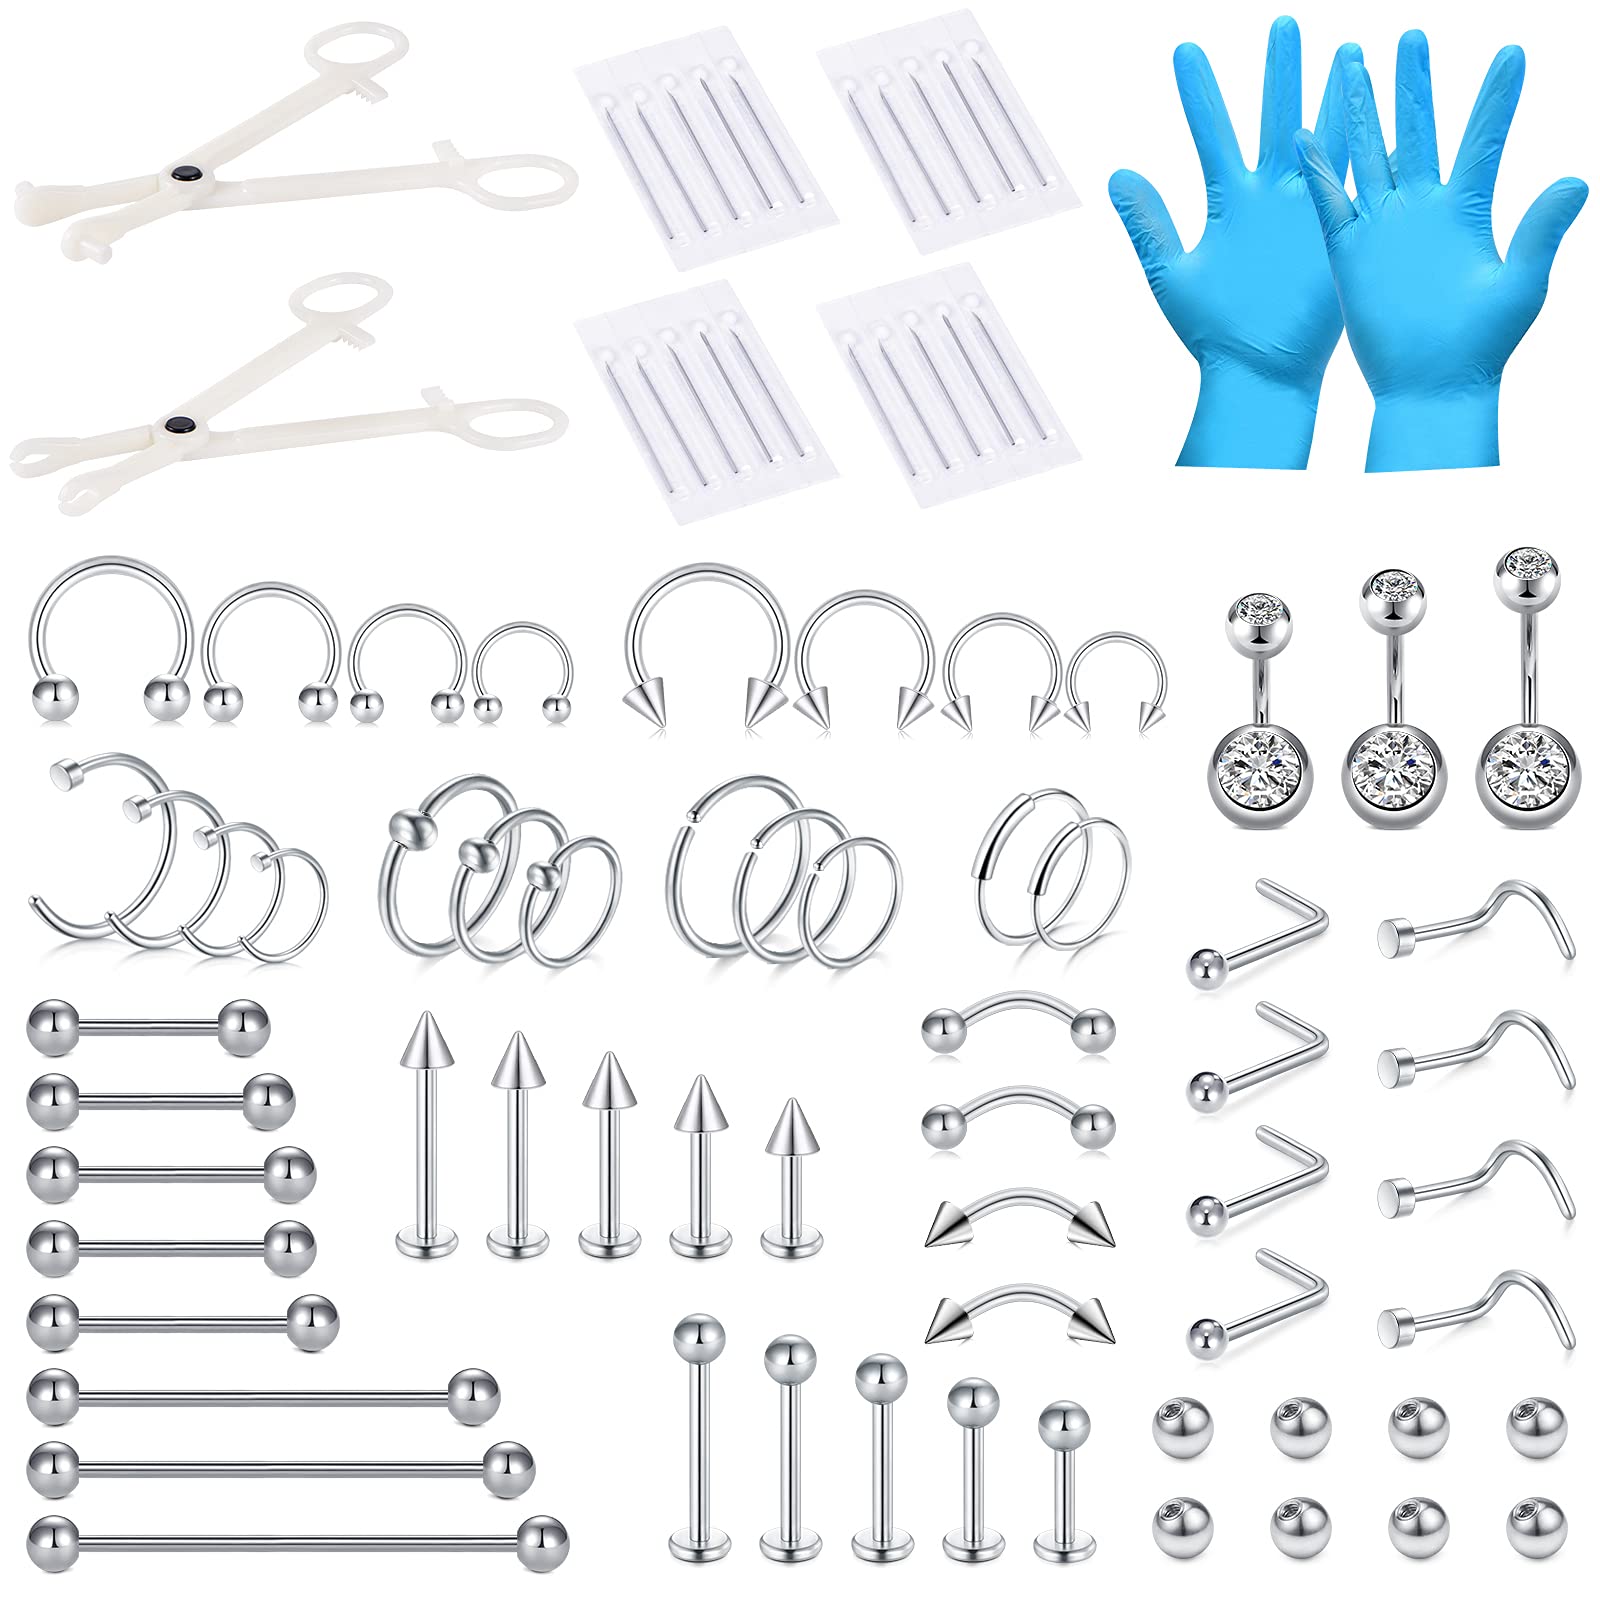 75PCS Mixed-size Piercing Kits for All Piercings,Stainless Steel